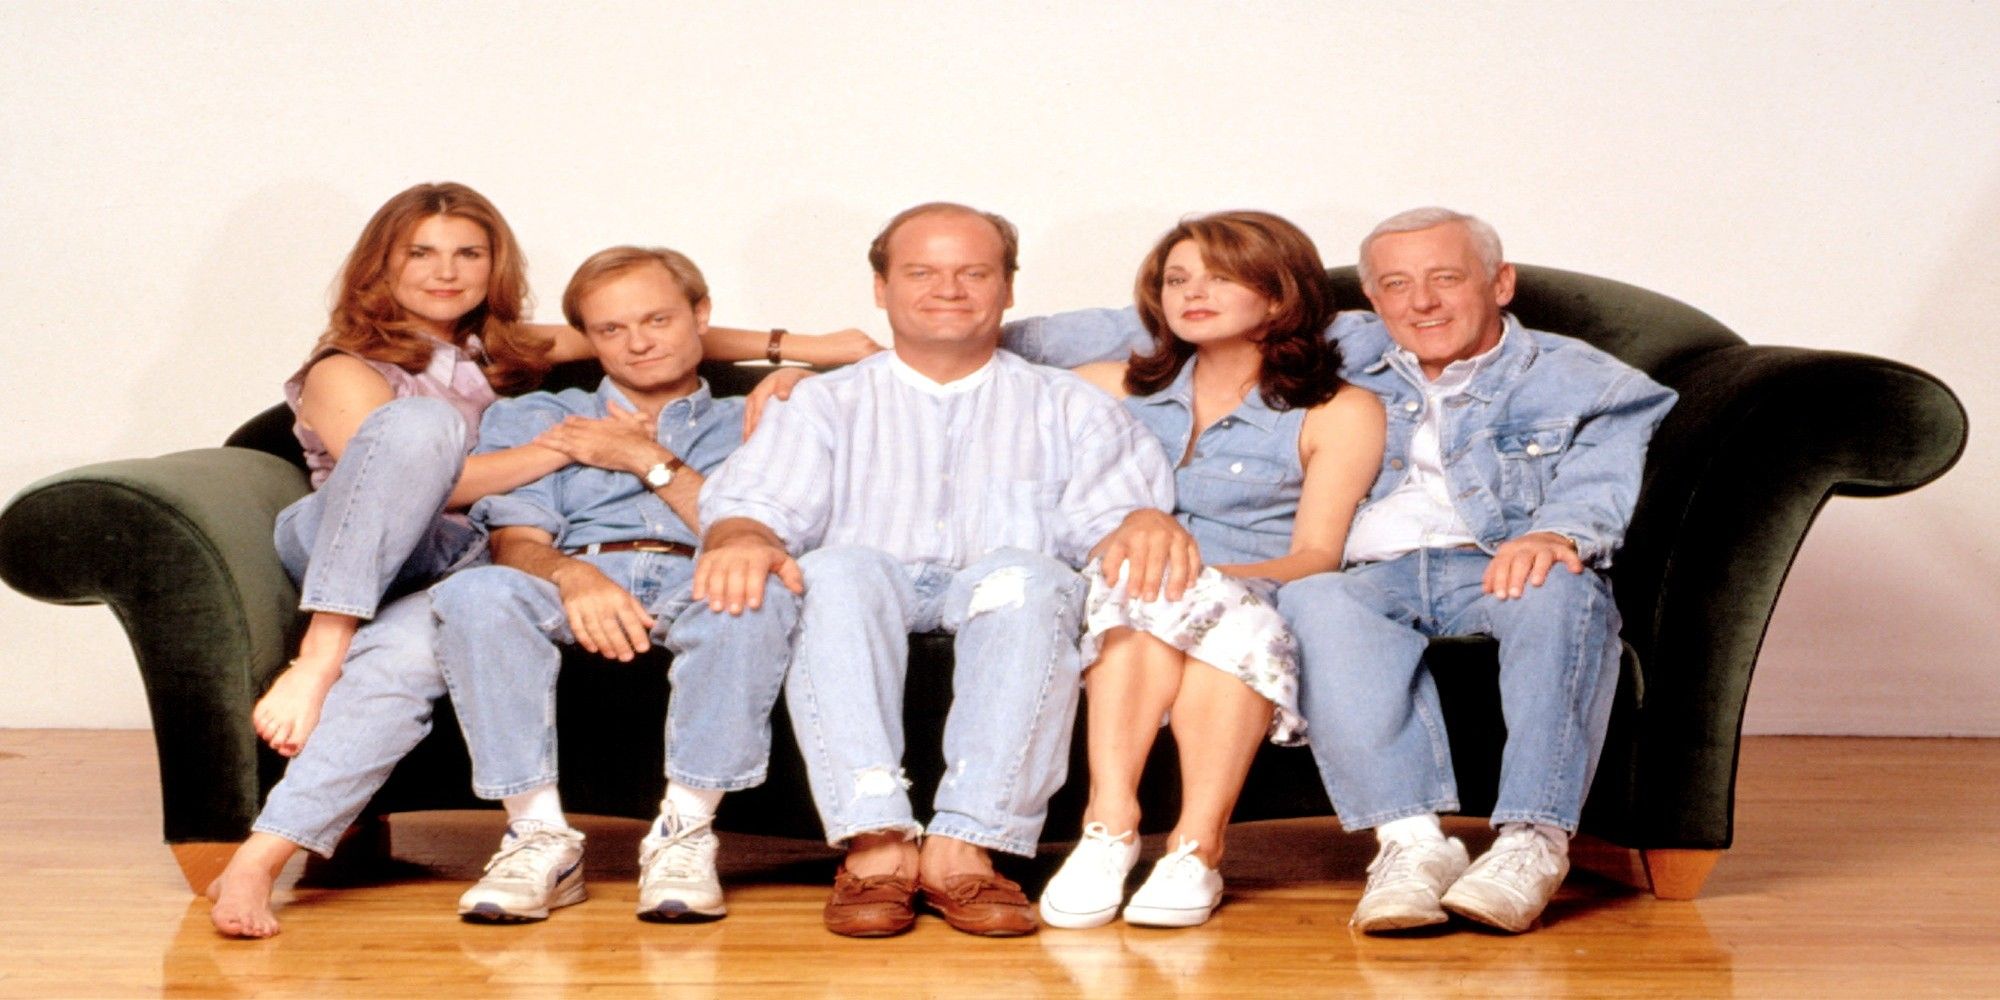 The-Frasier-Cast-Sitting-On-A-Couch